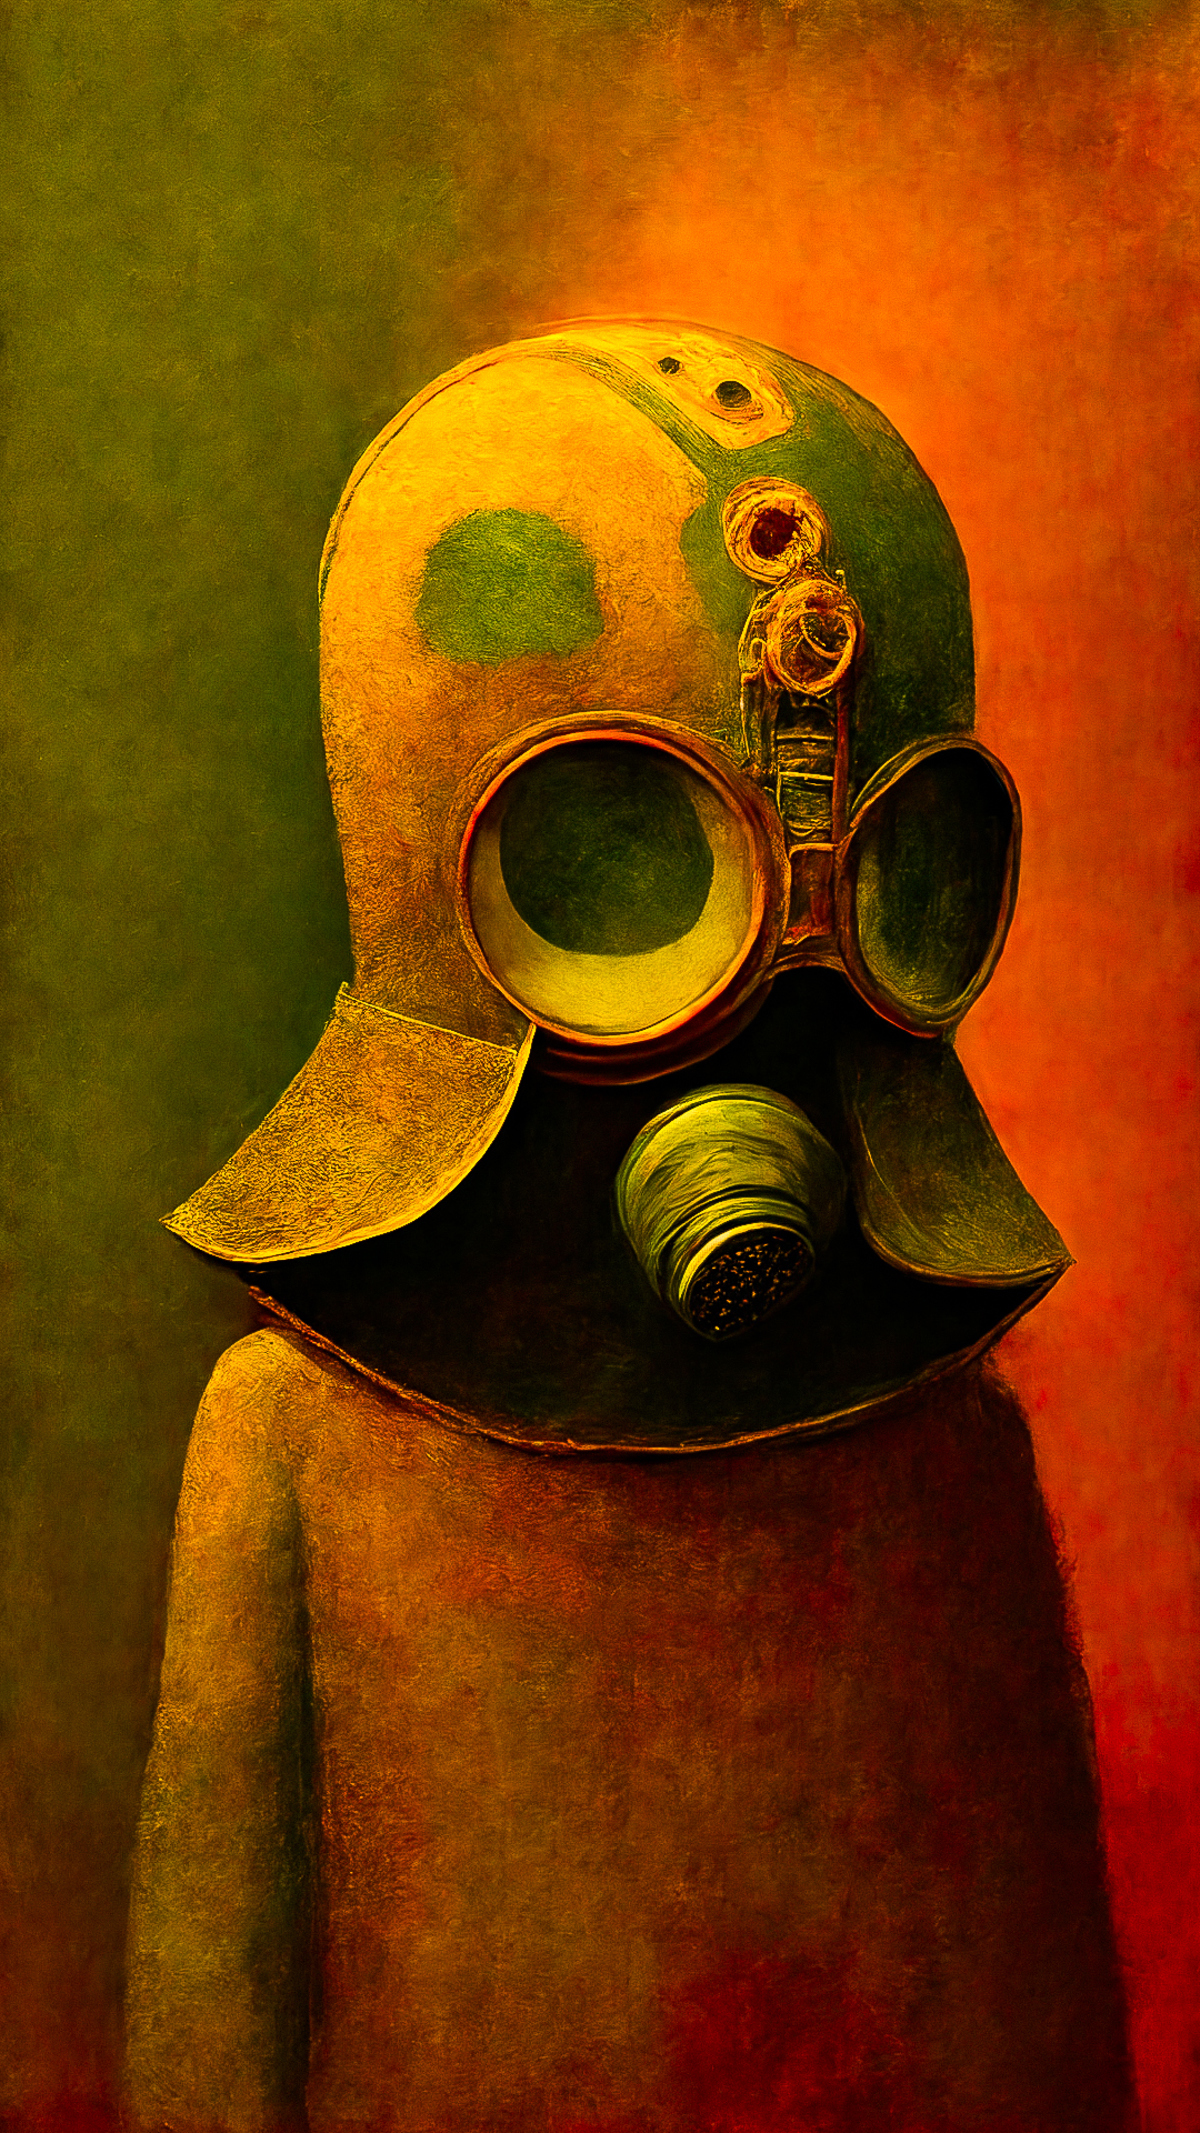 A painting of a person wearing a gas mask and goggles.